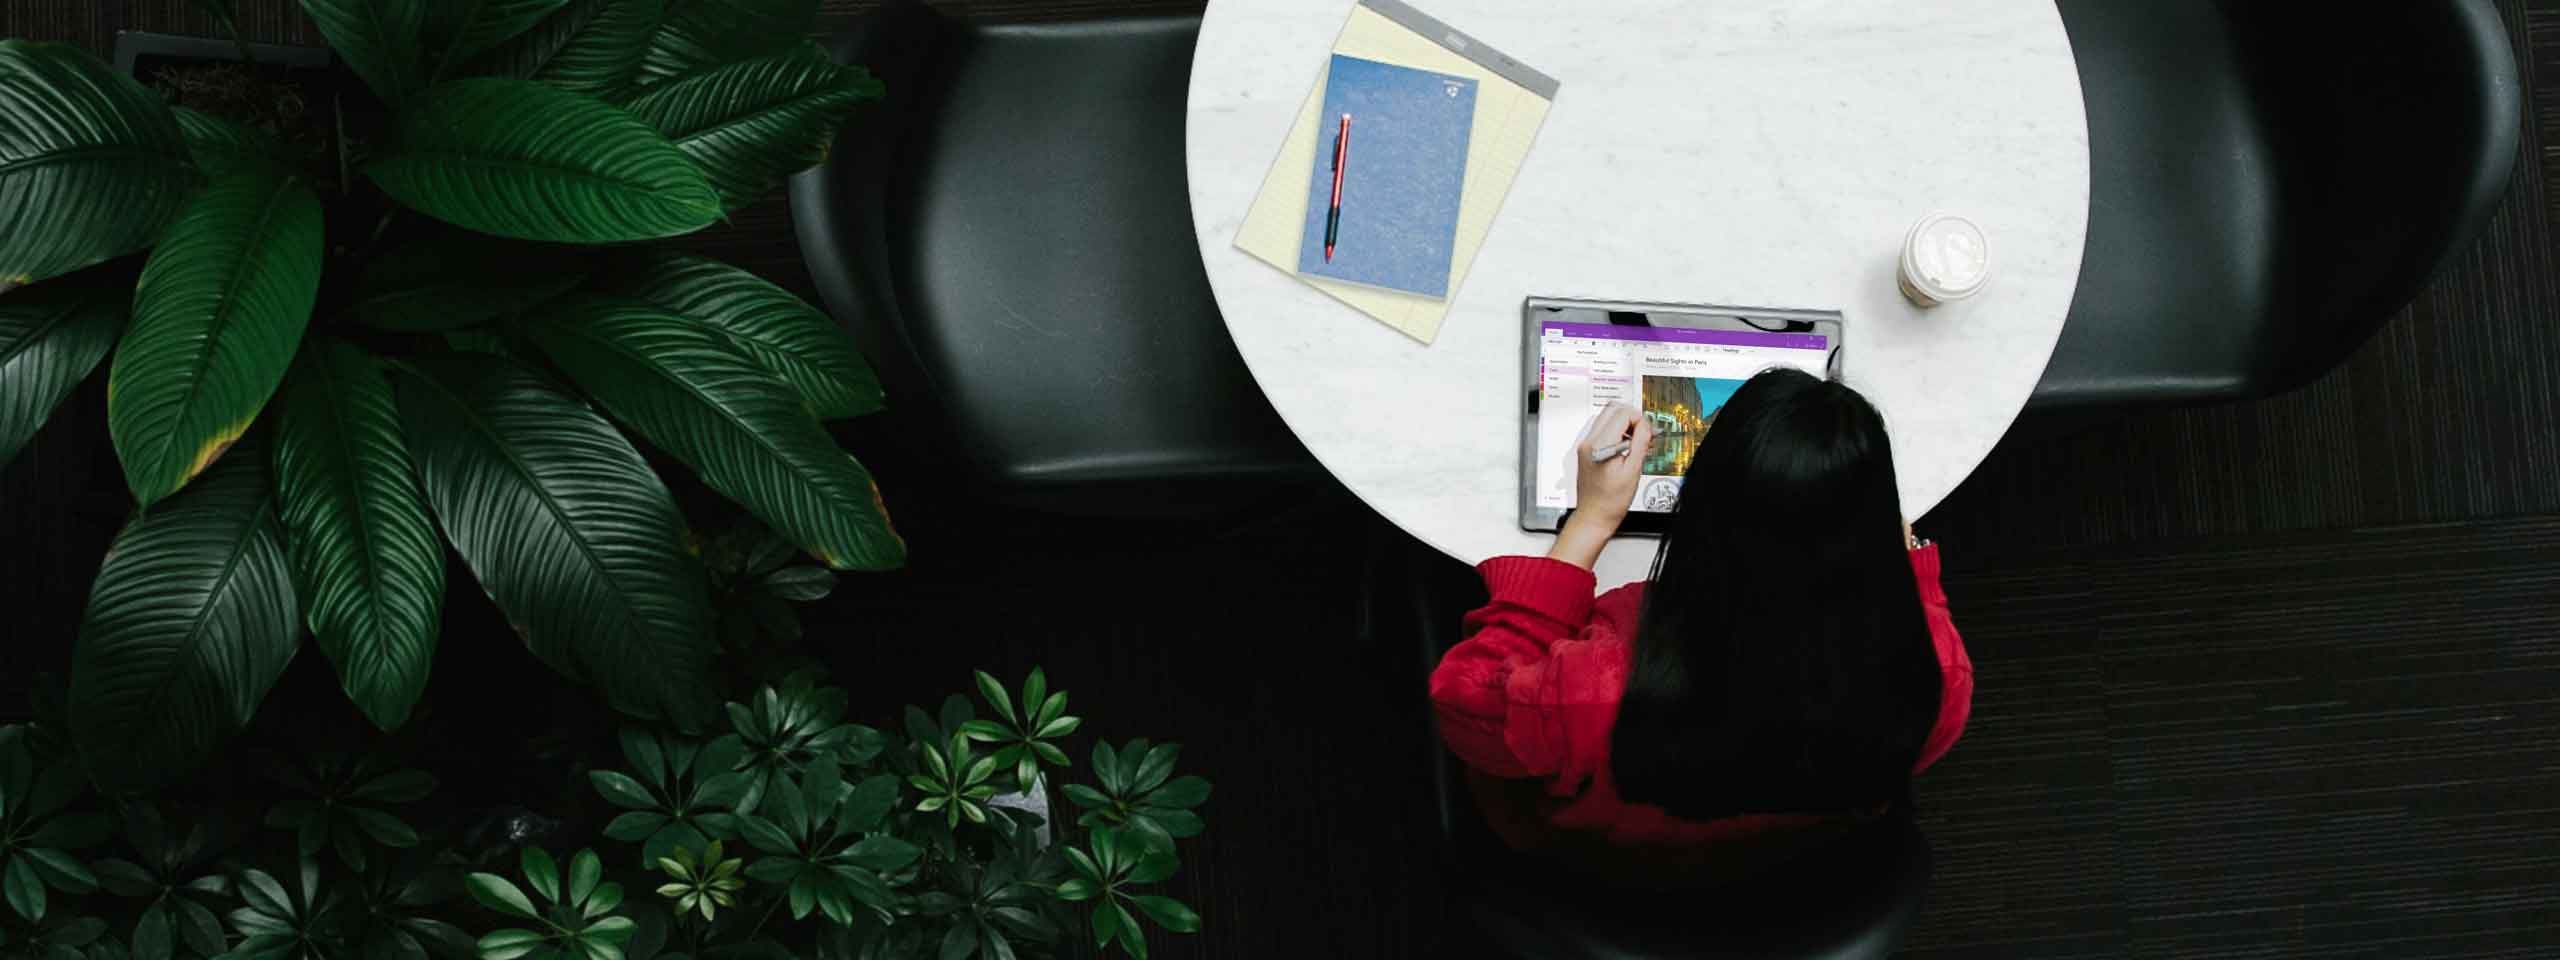 Photo of a person using OneNote on a tablet for work